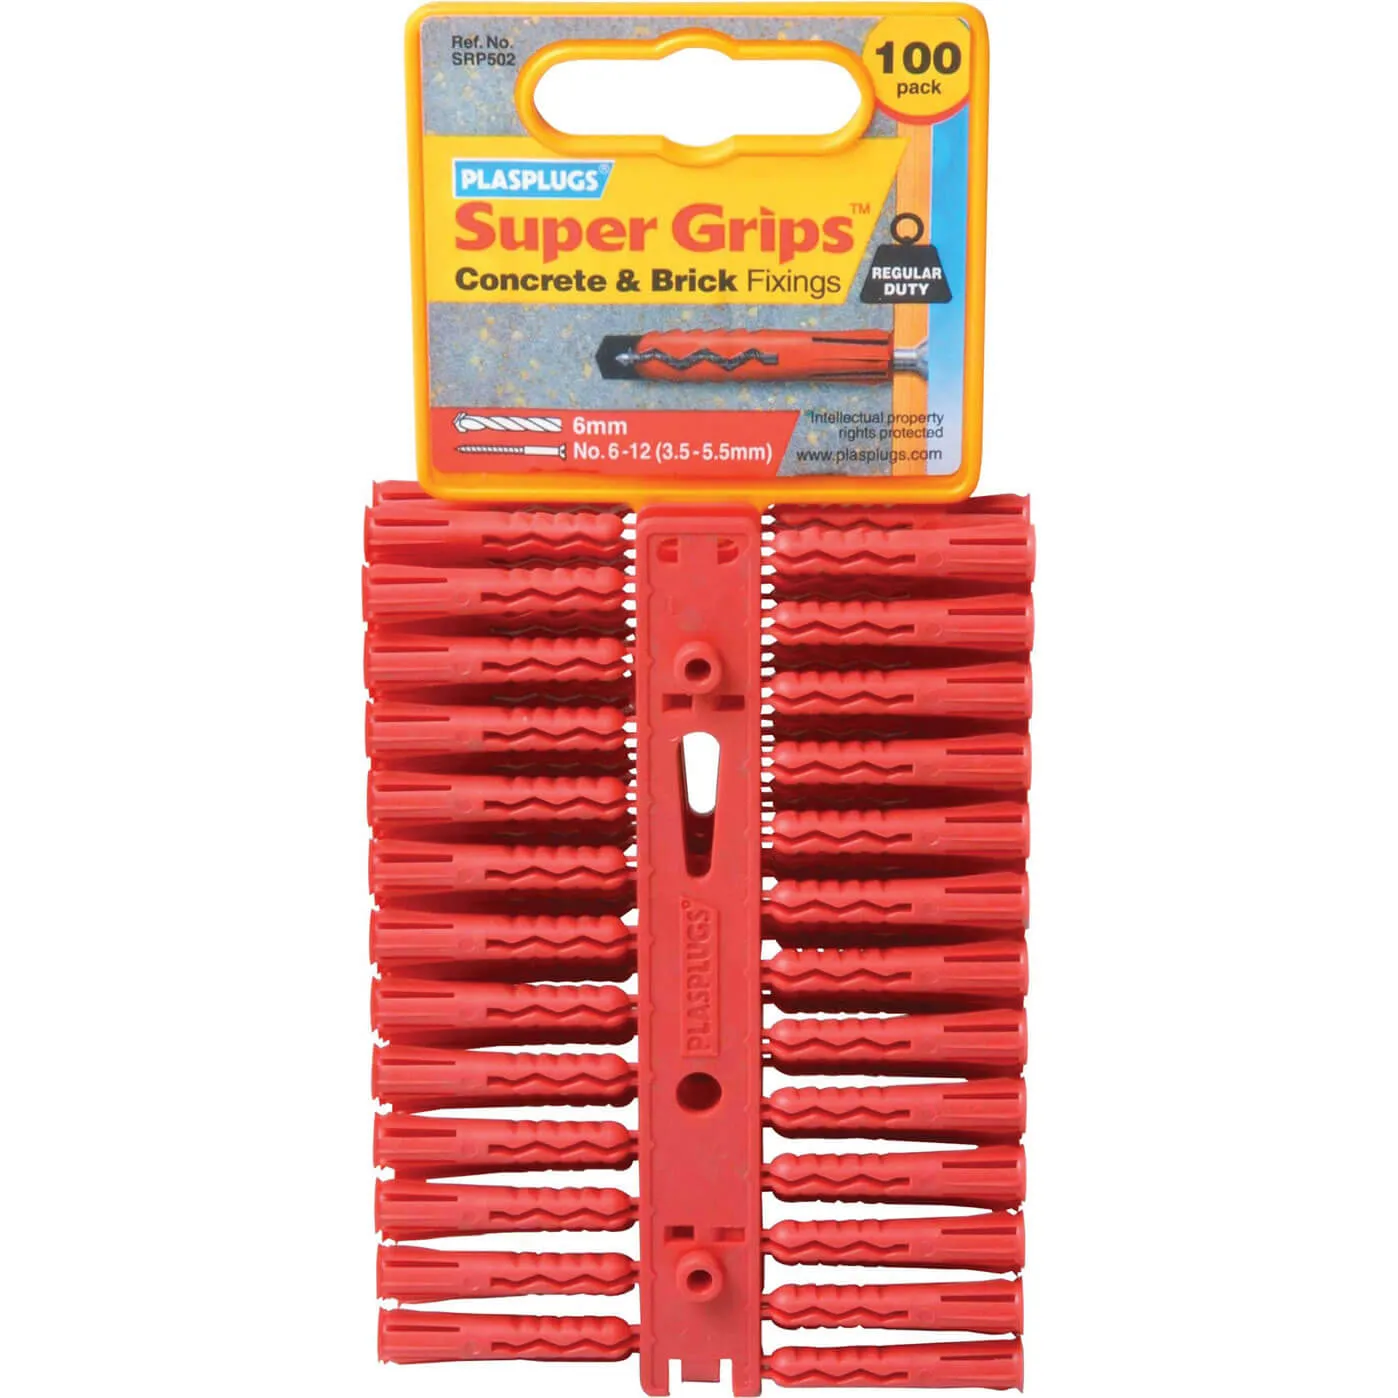 Plasplugs Regular Duty Super Grips Concrete and Brick Fixings - RED, Pack of 100